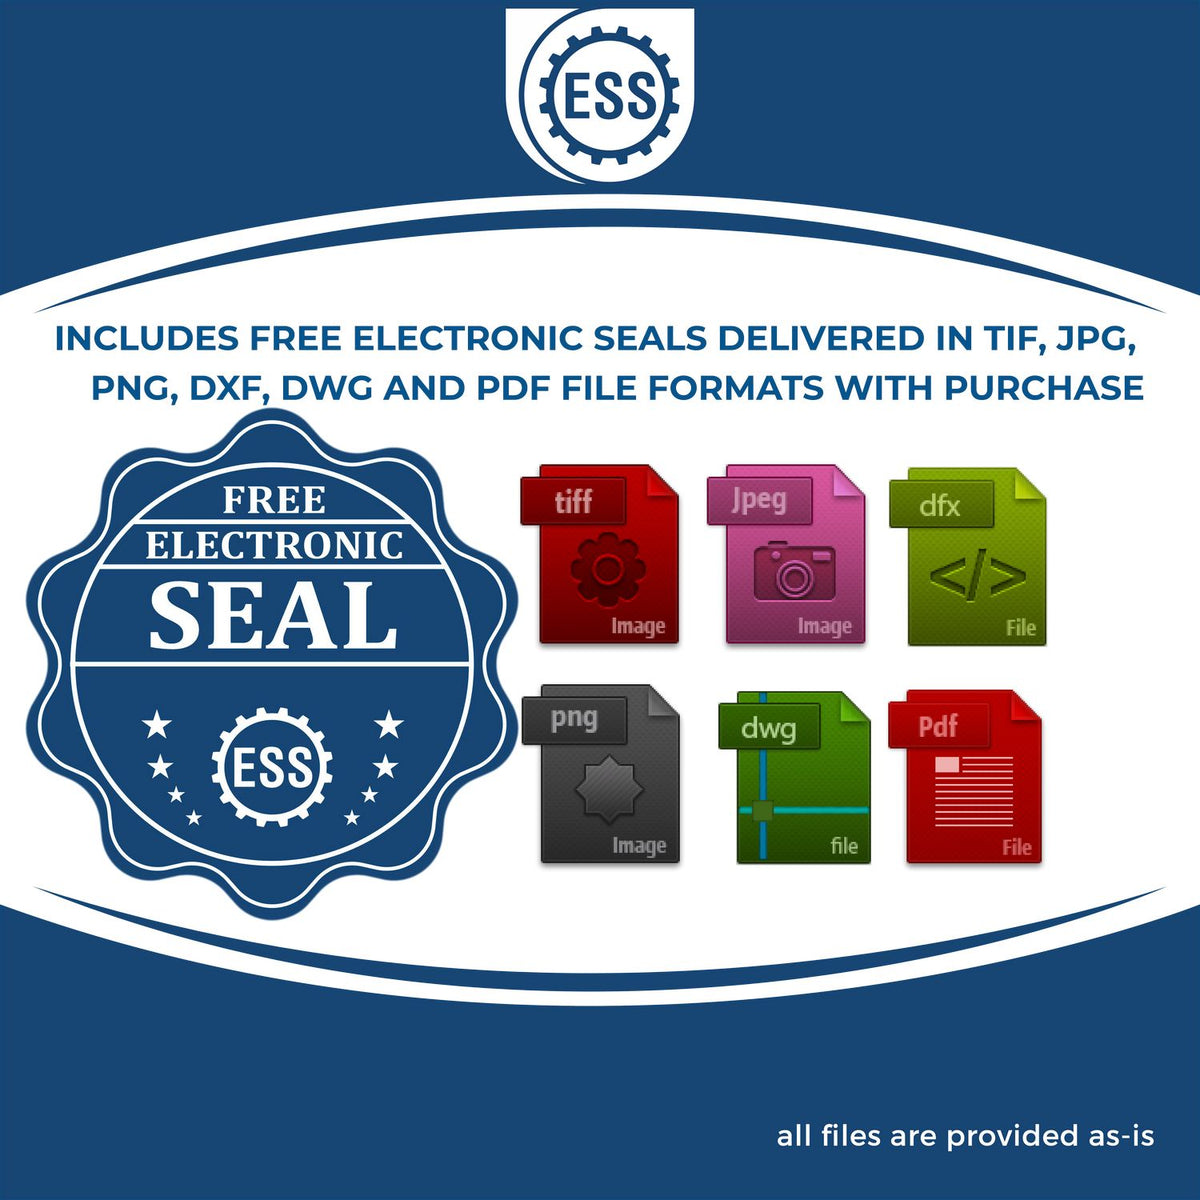 An infographic for the free electronic seal for the Gift New Mexico Land Surveyor Seal illustrating the different file type icons such as DXF, DWG, TIF, JPG and PNG.